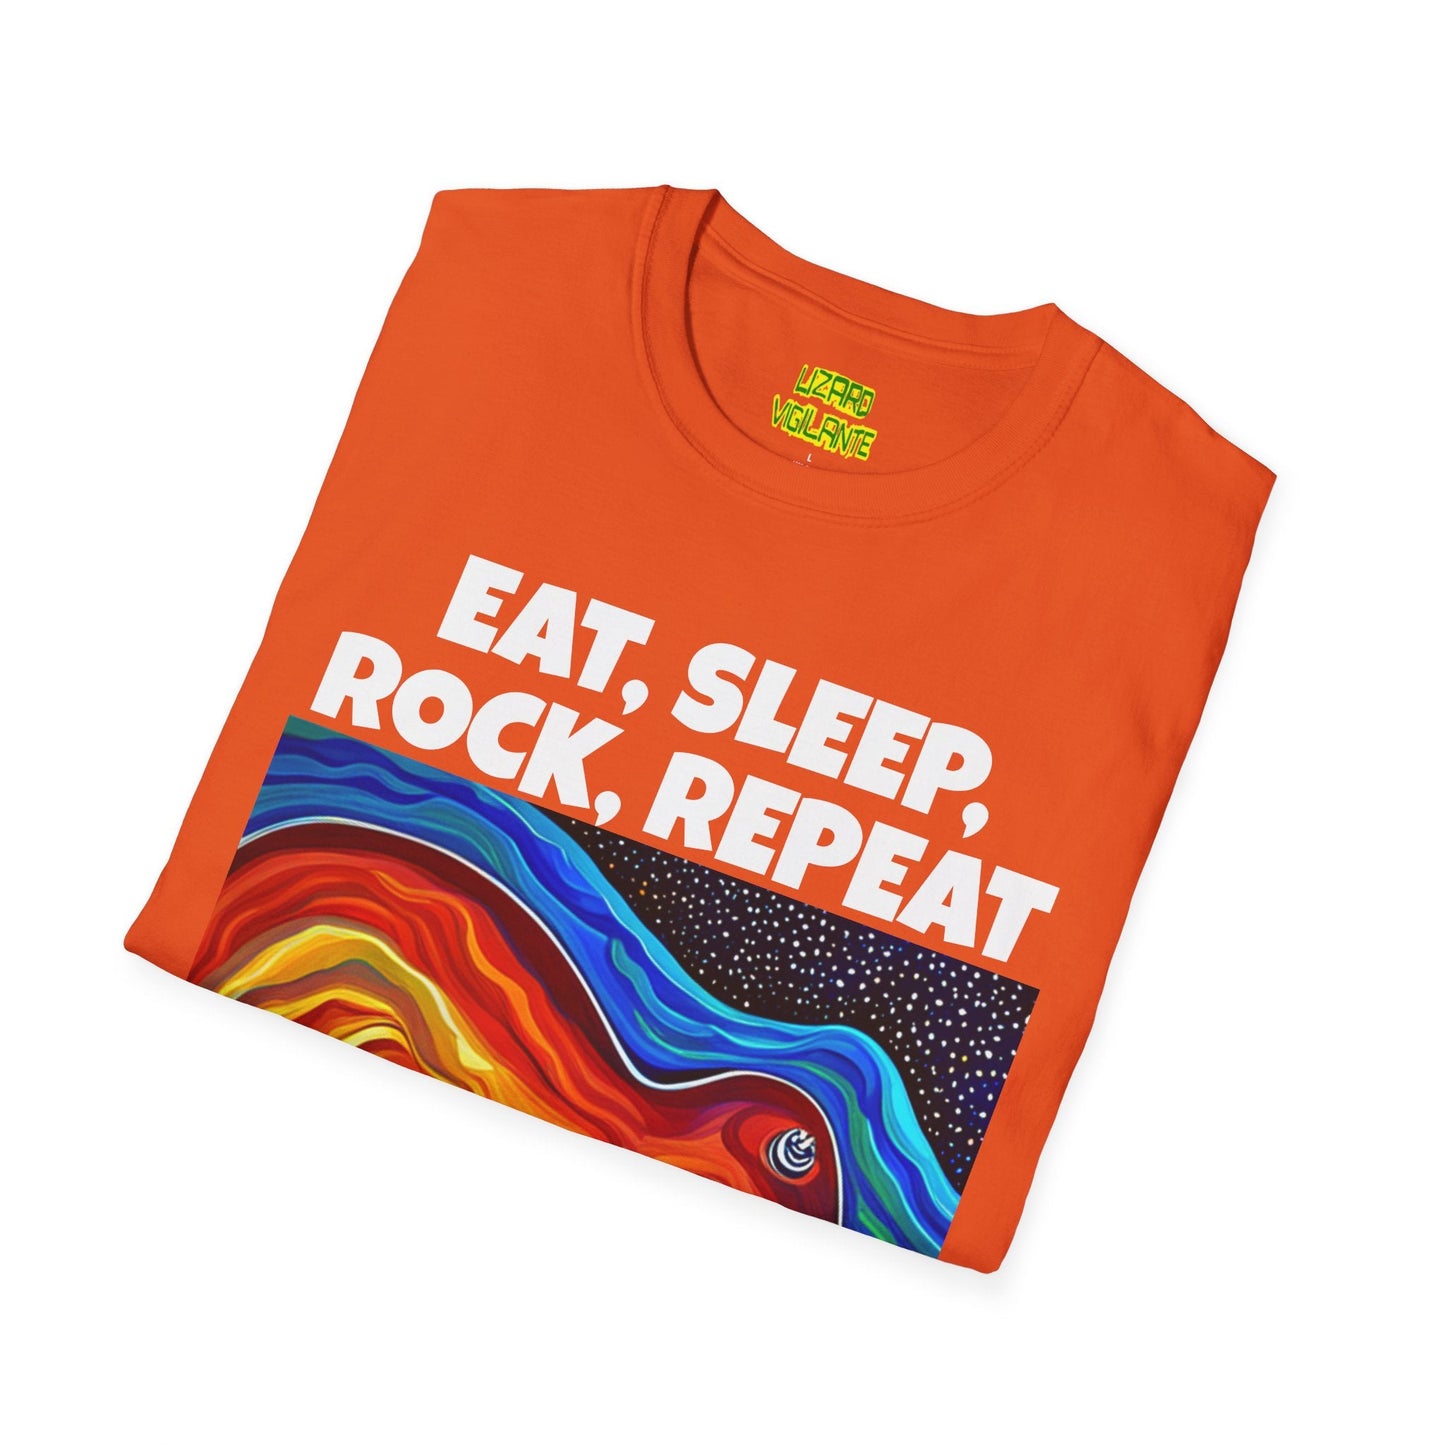 Eat, Sleep, Rock, Repeat with Cool Guitar Graphic Unisex Softstyle T-Shirt - Lizard Vigilante